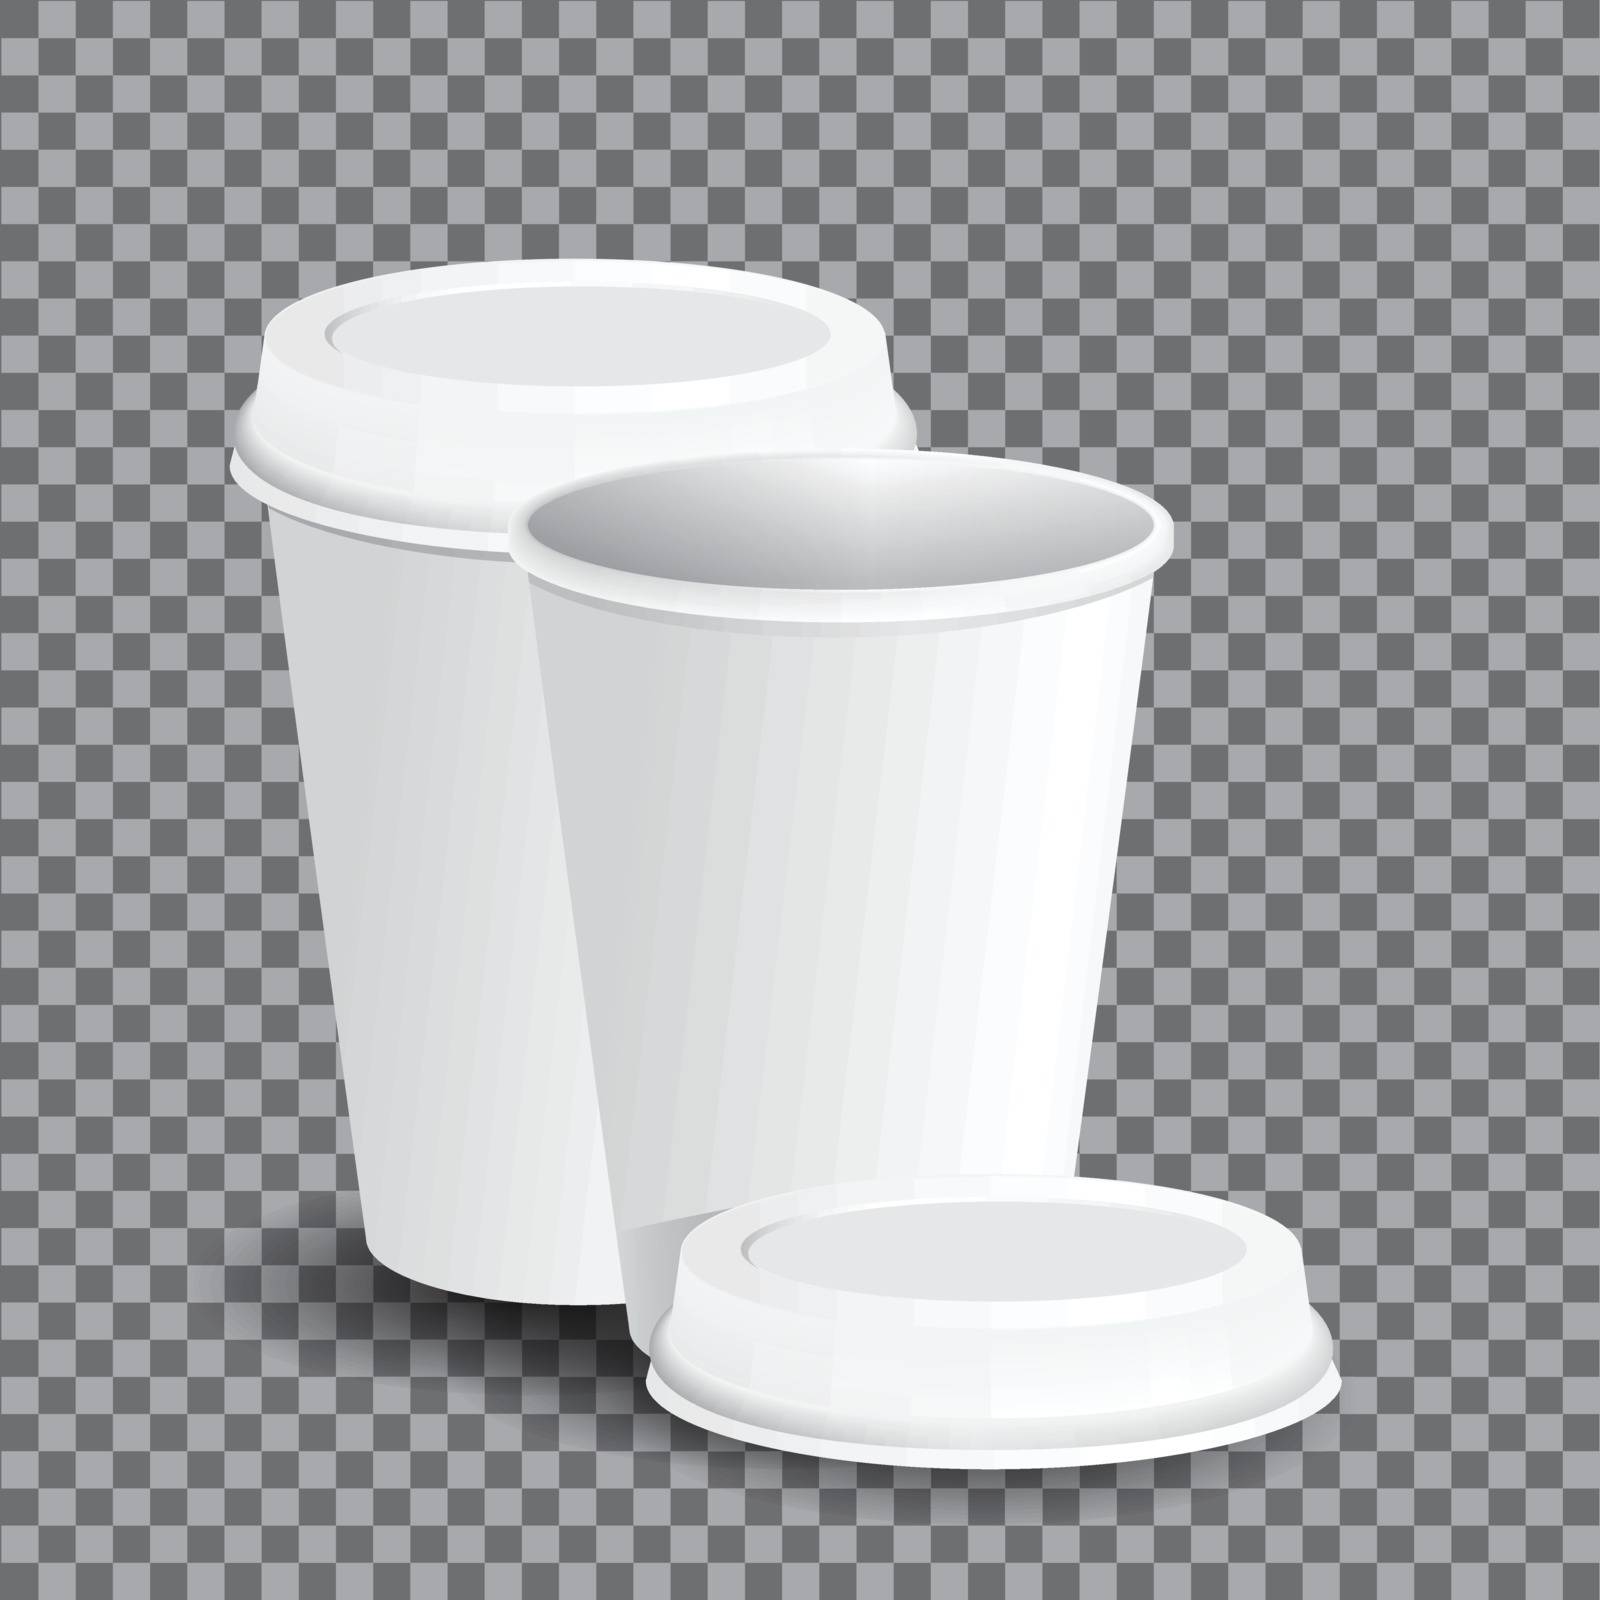 Coffee cups on transparency grid - vector illustration by solargaria